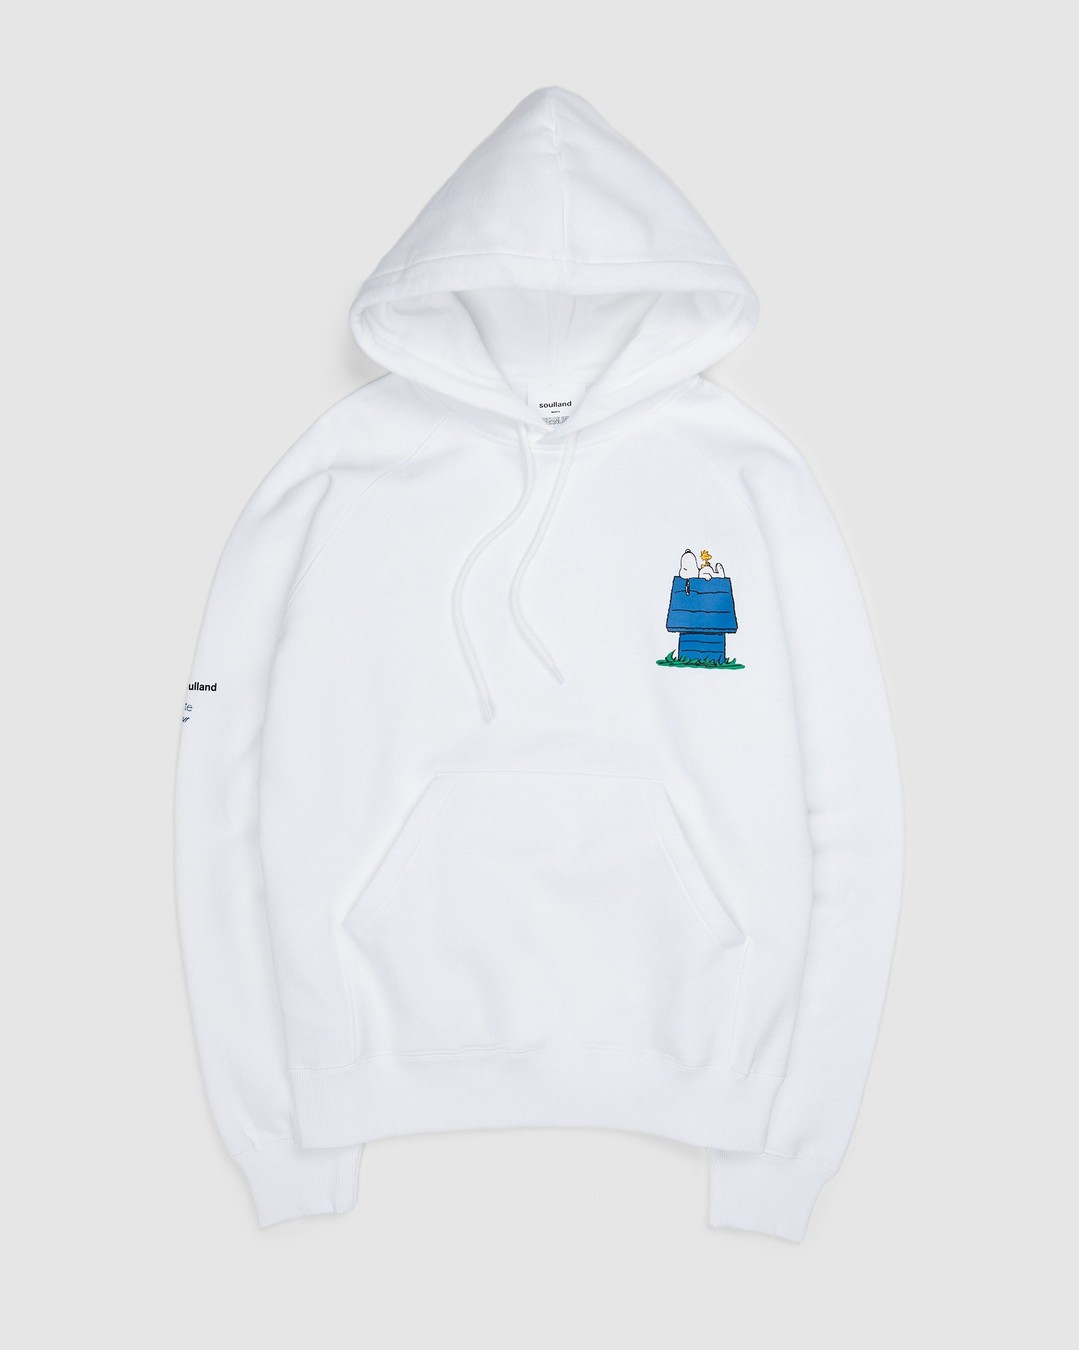 Colette Mon Amour x Soulland – Snoopy Bed White Hoodie - Sweats - White - Image 1